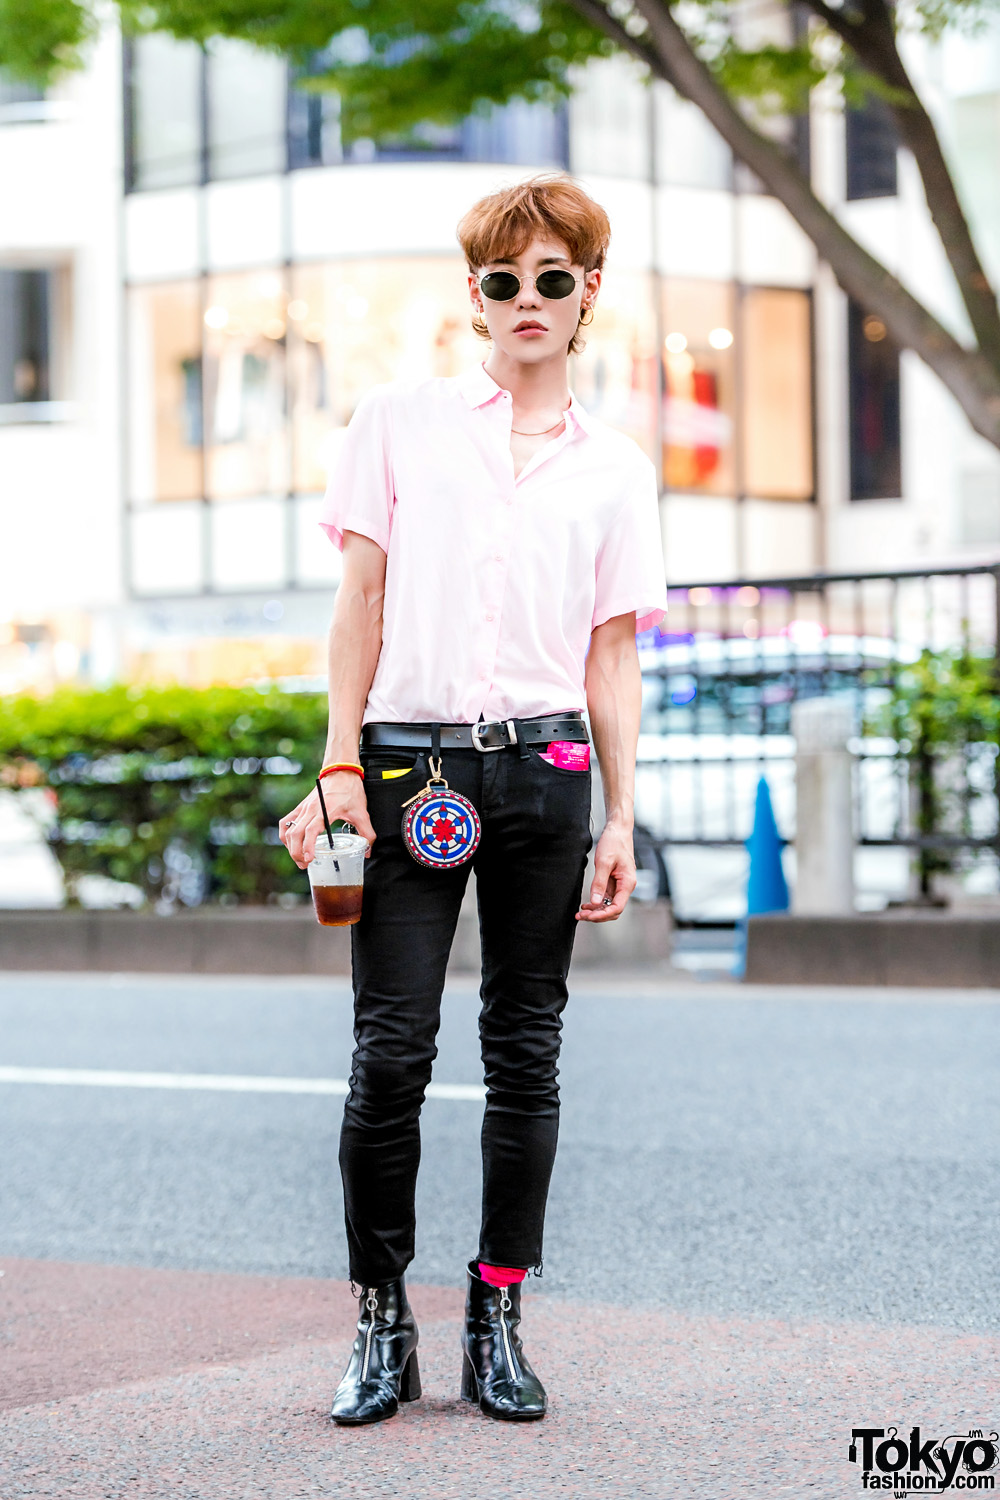 The Symbolic Tokyo Designer in Harajuku w/ John Lawrence Sullivan Outfit, Zara Pointy Boots & BlackMeans Accessories